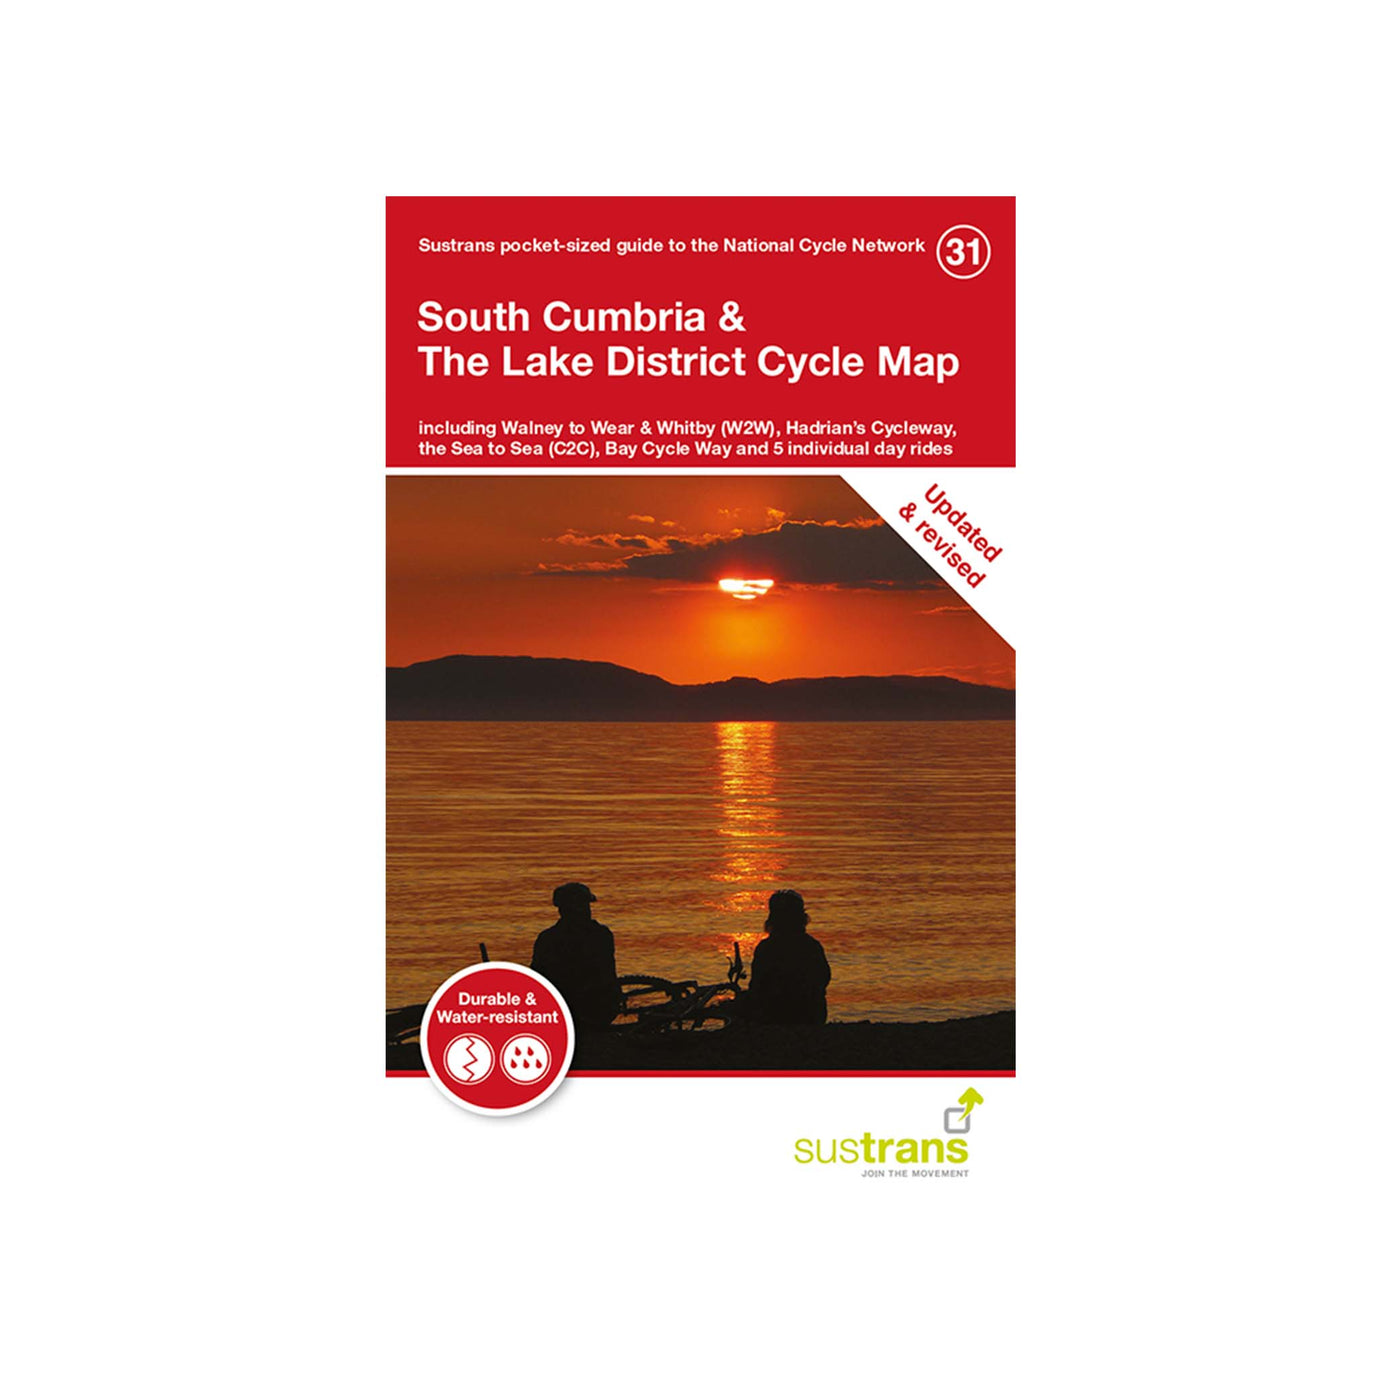 Sustrans South Cumbria and the Lake District Cycle Map (31)